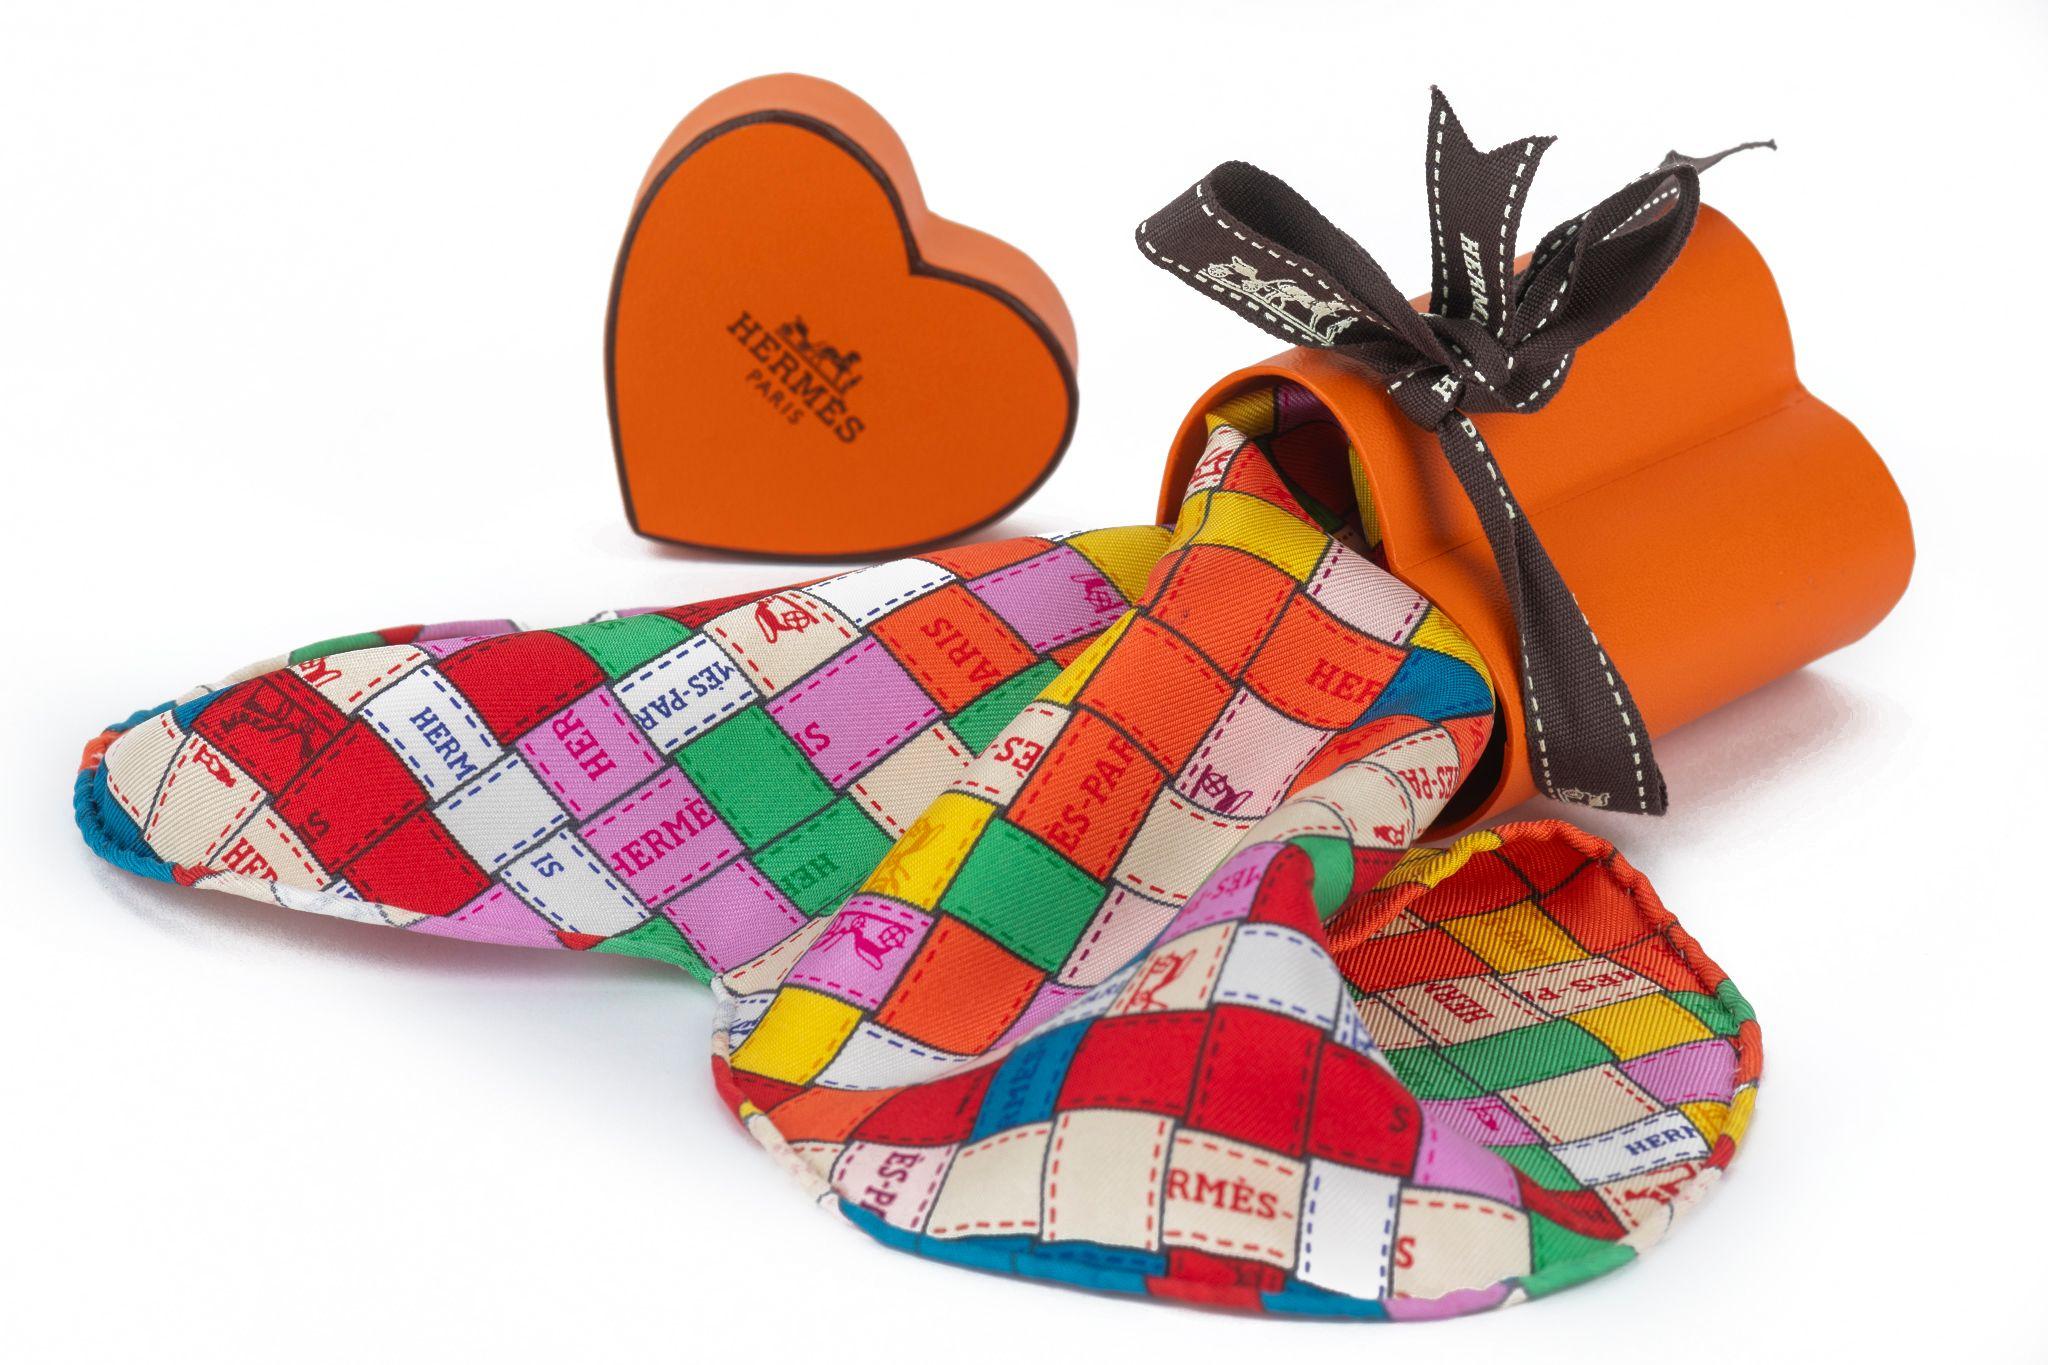 Hermes limited edition mini heart multicolor ribbon scarf. Hand rolled edges.
Comes with original box.